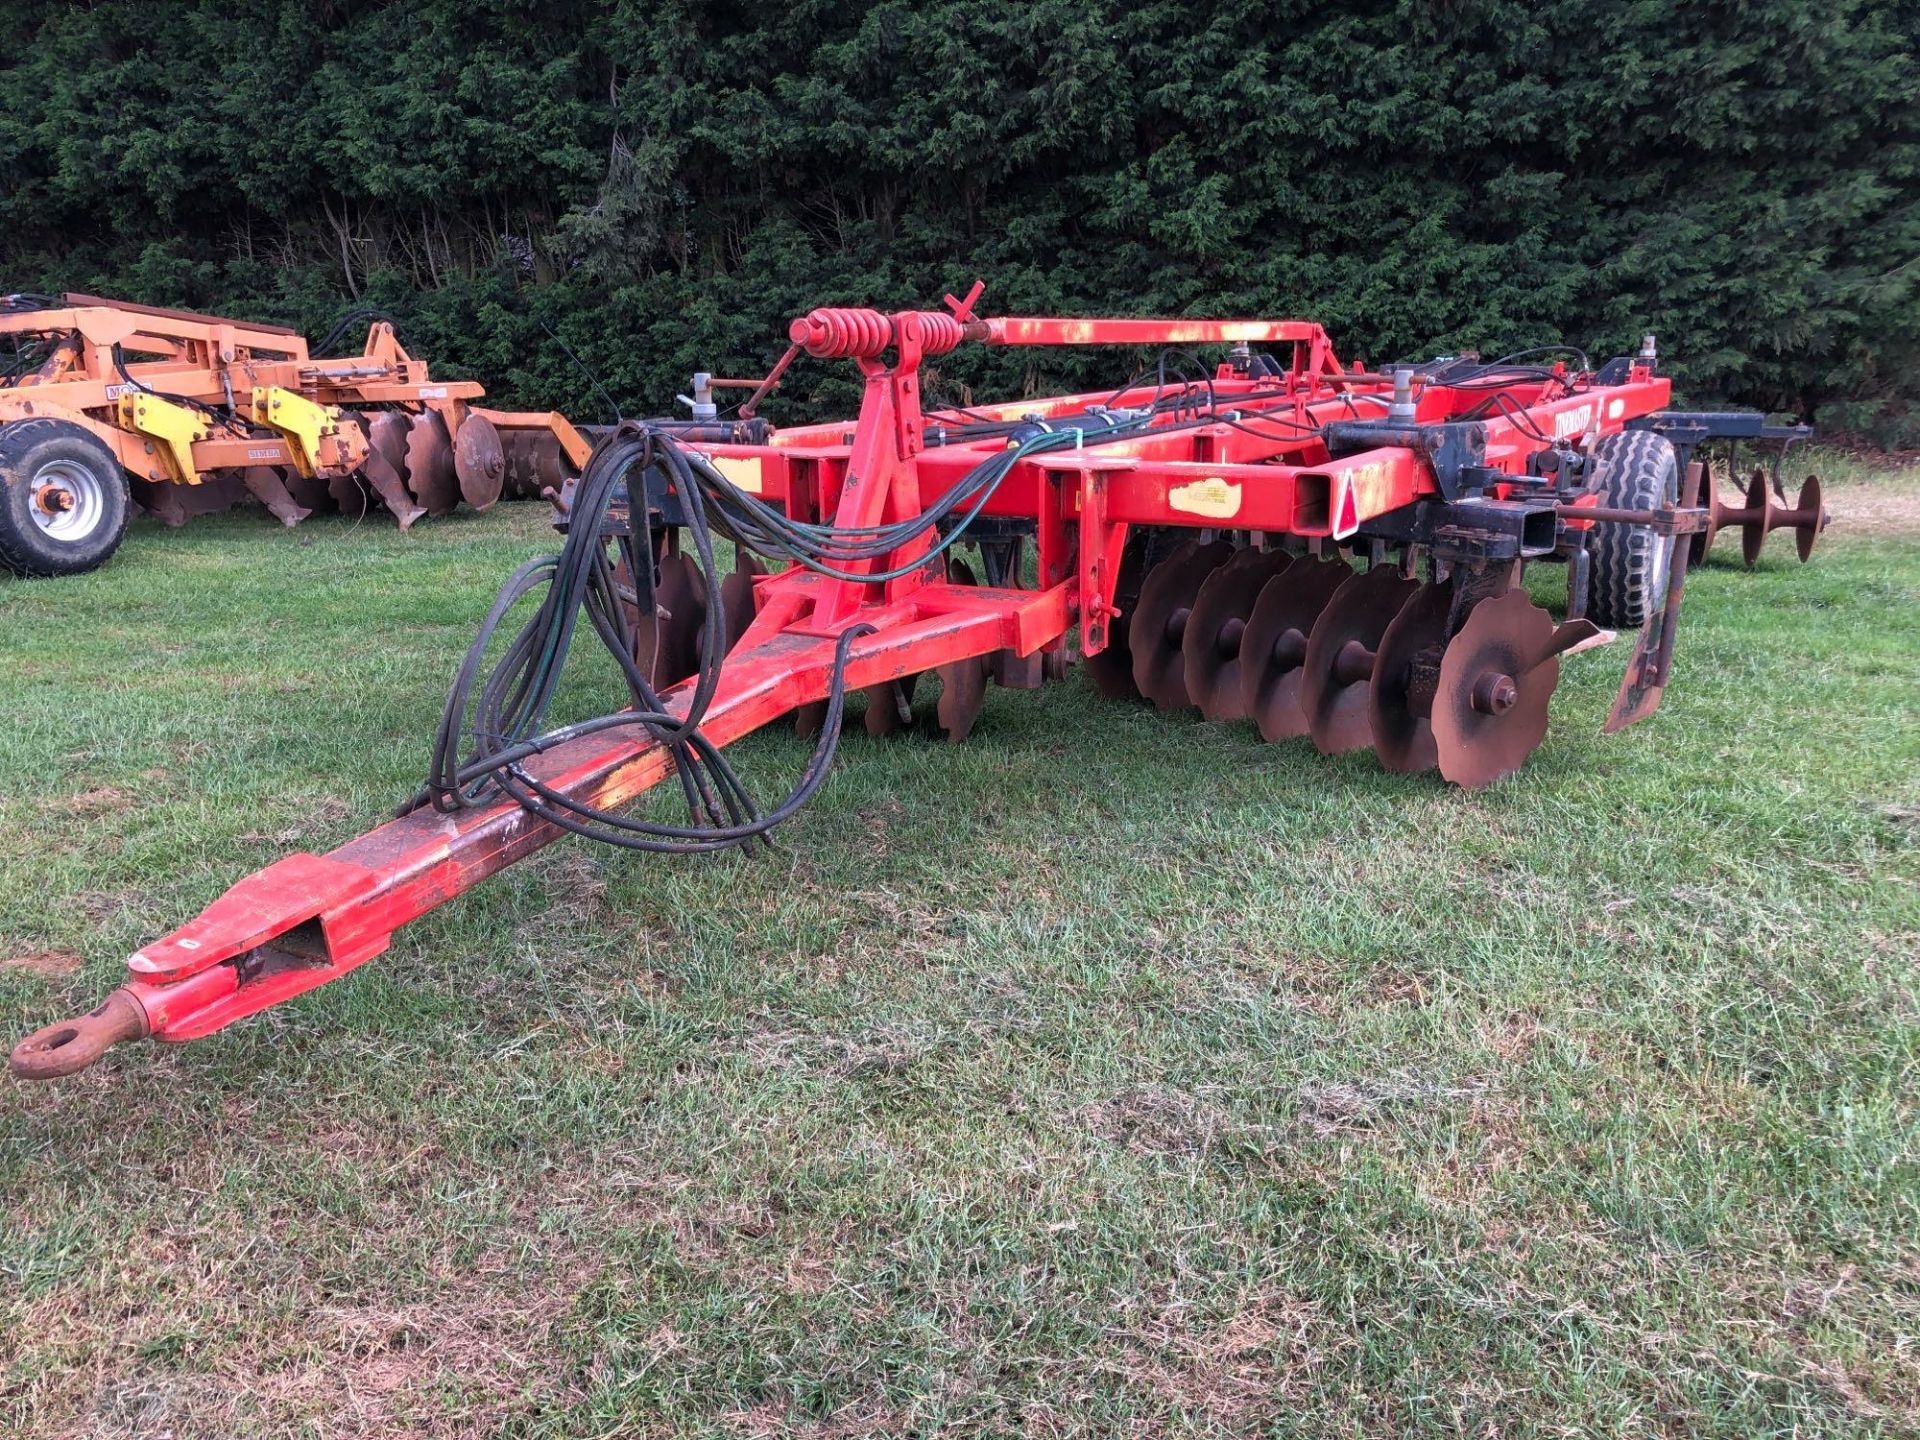 2001 Quivogne TM28 Tinemaster trailed cultivator with 5 auto reset subsoiler legs, front and rear di